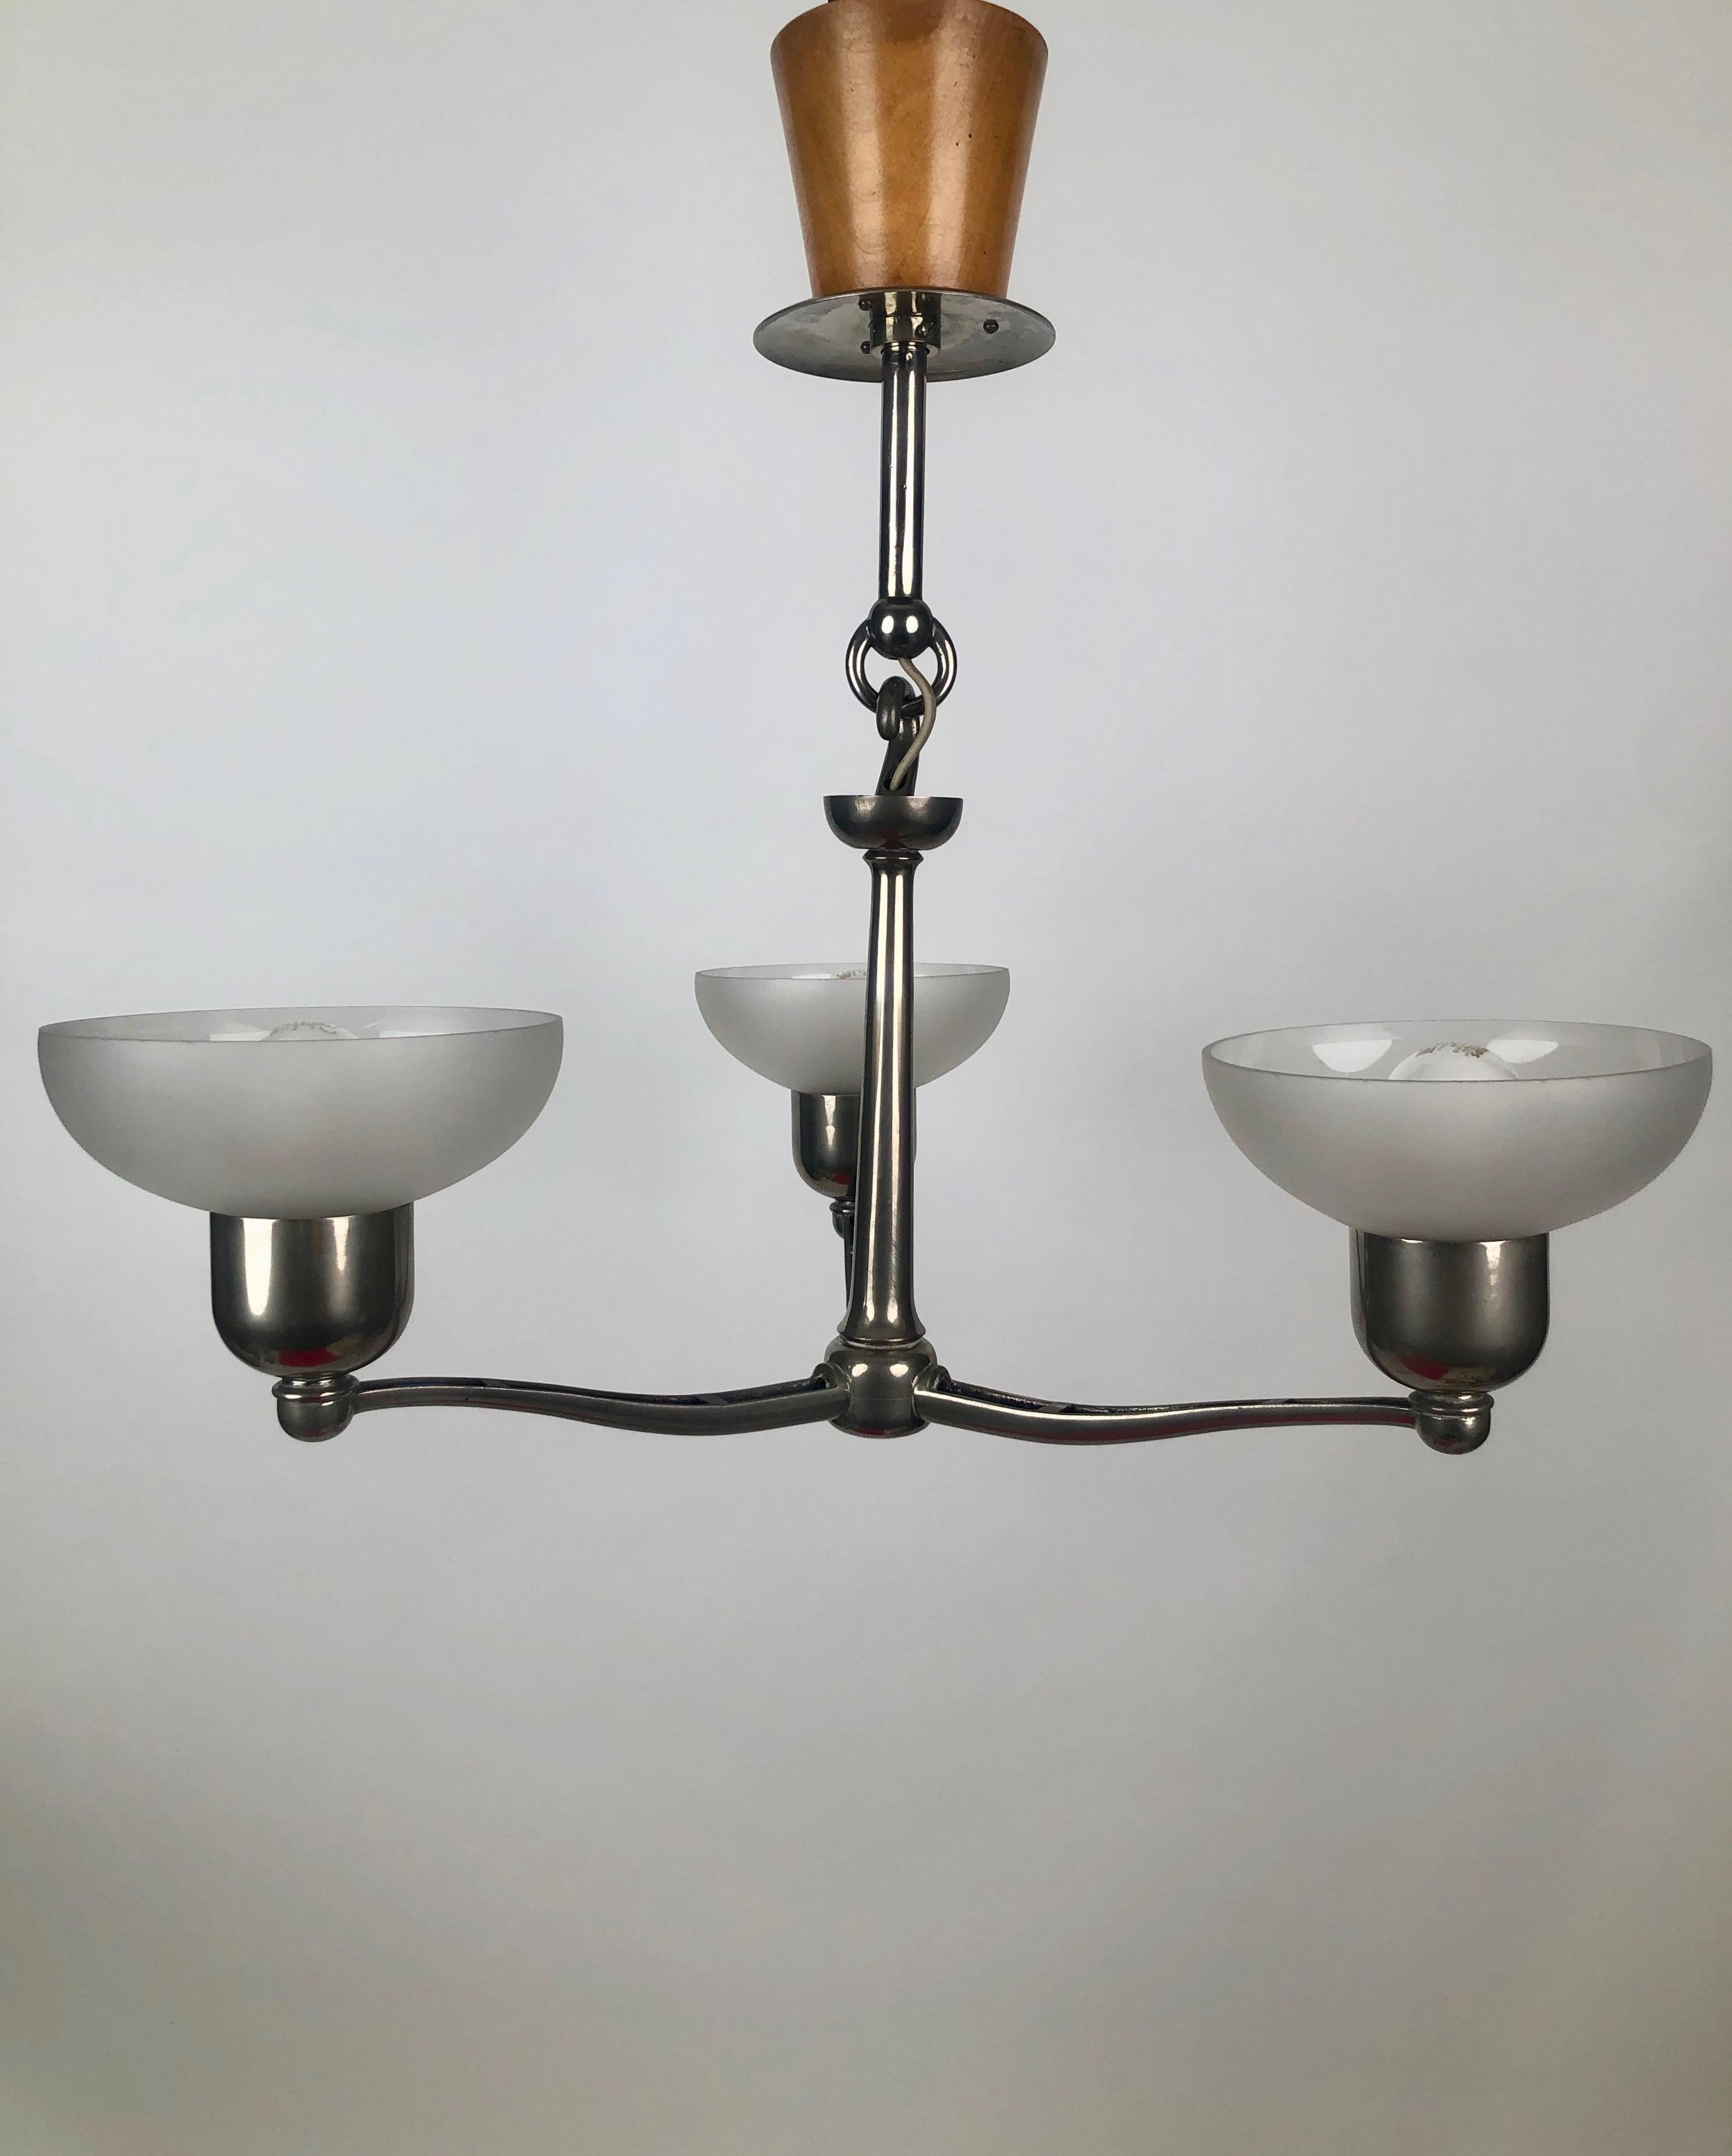 A functionalist three arm chandler from 1930, Austria.
The metal parts are made from cast aluminium with an unusual wooden canopy 
and three frosted glass shades.